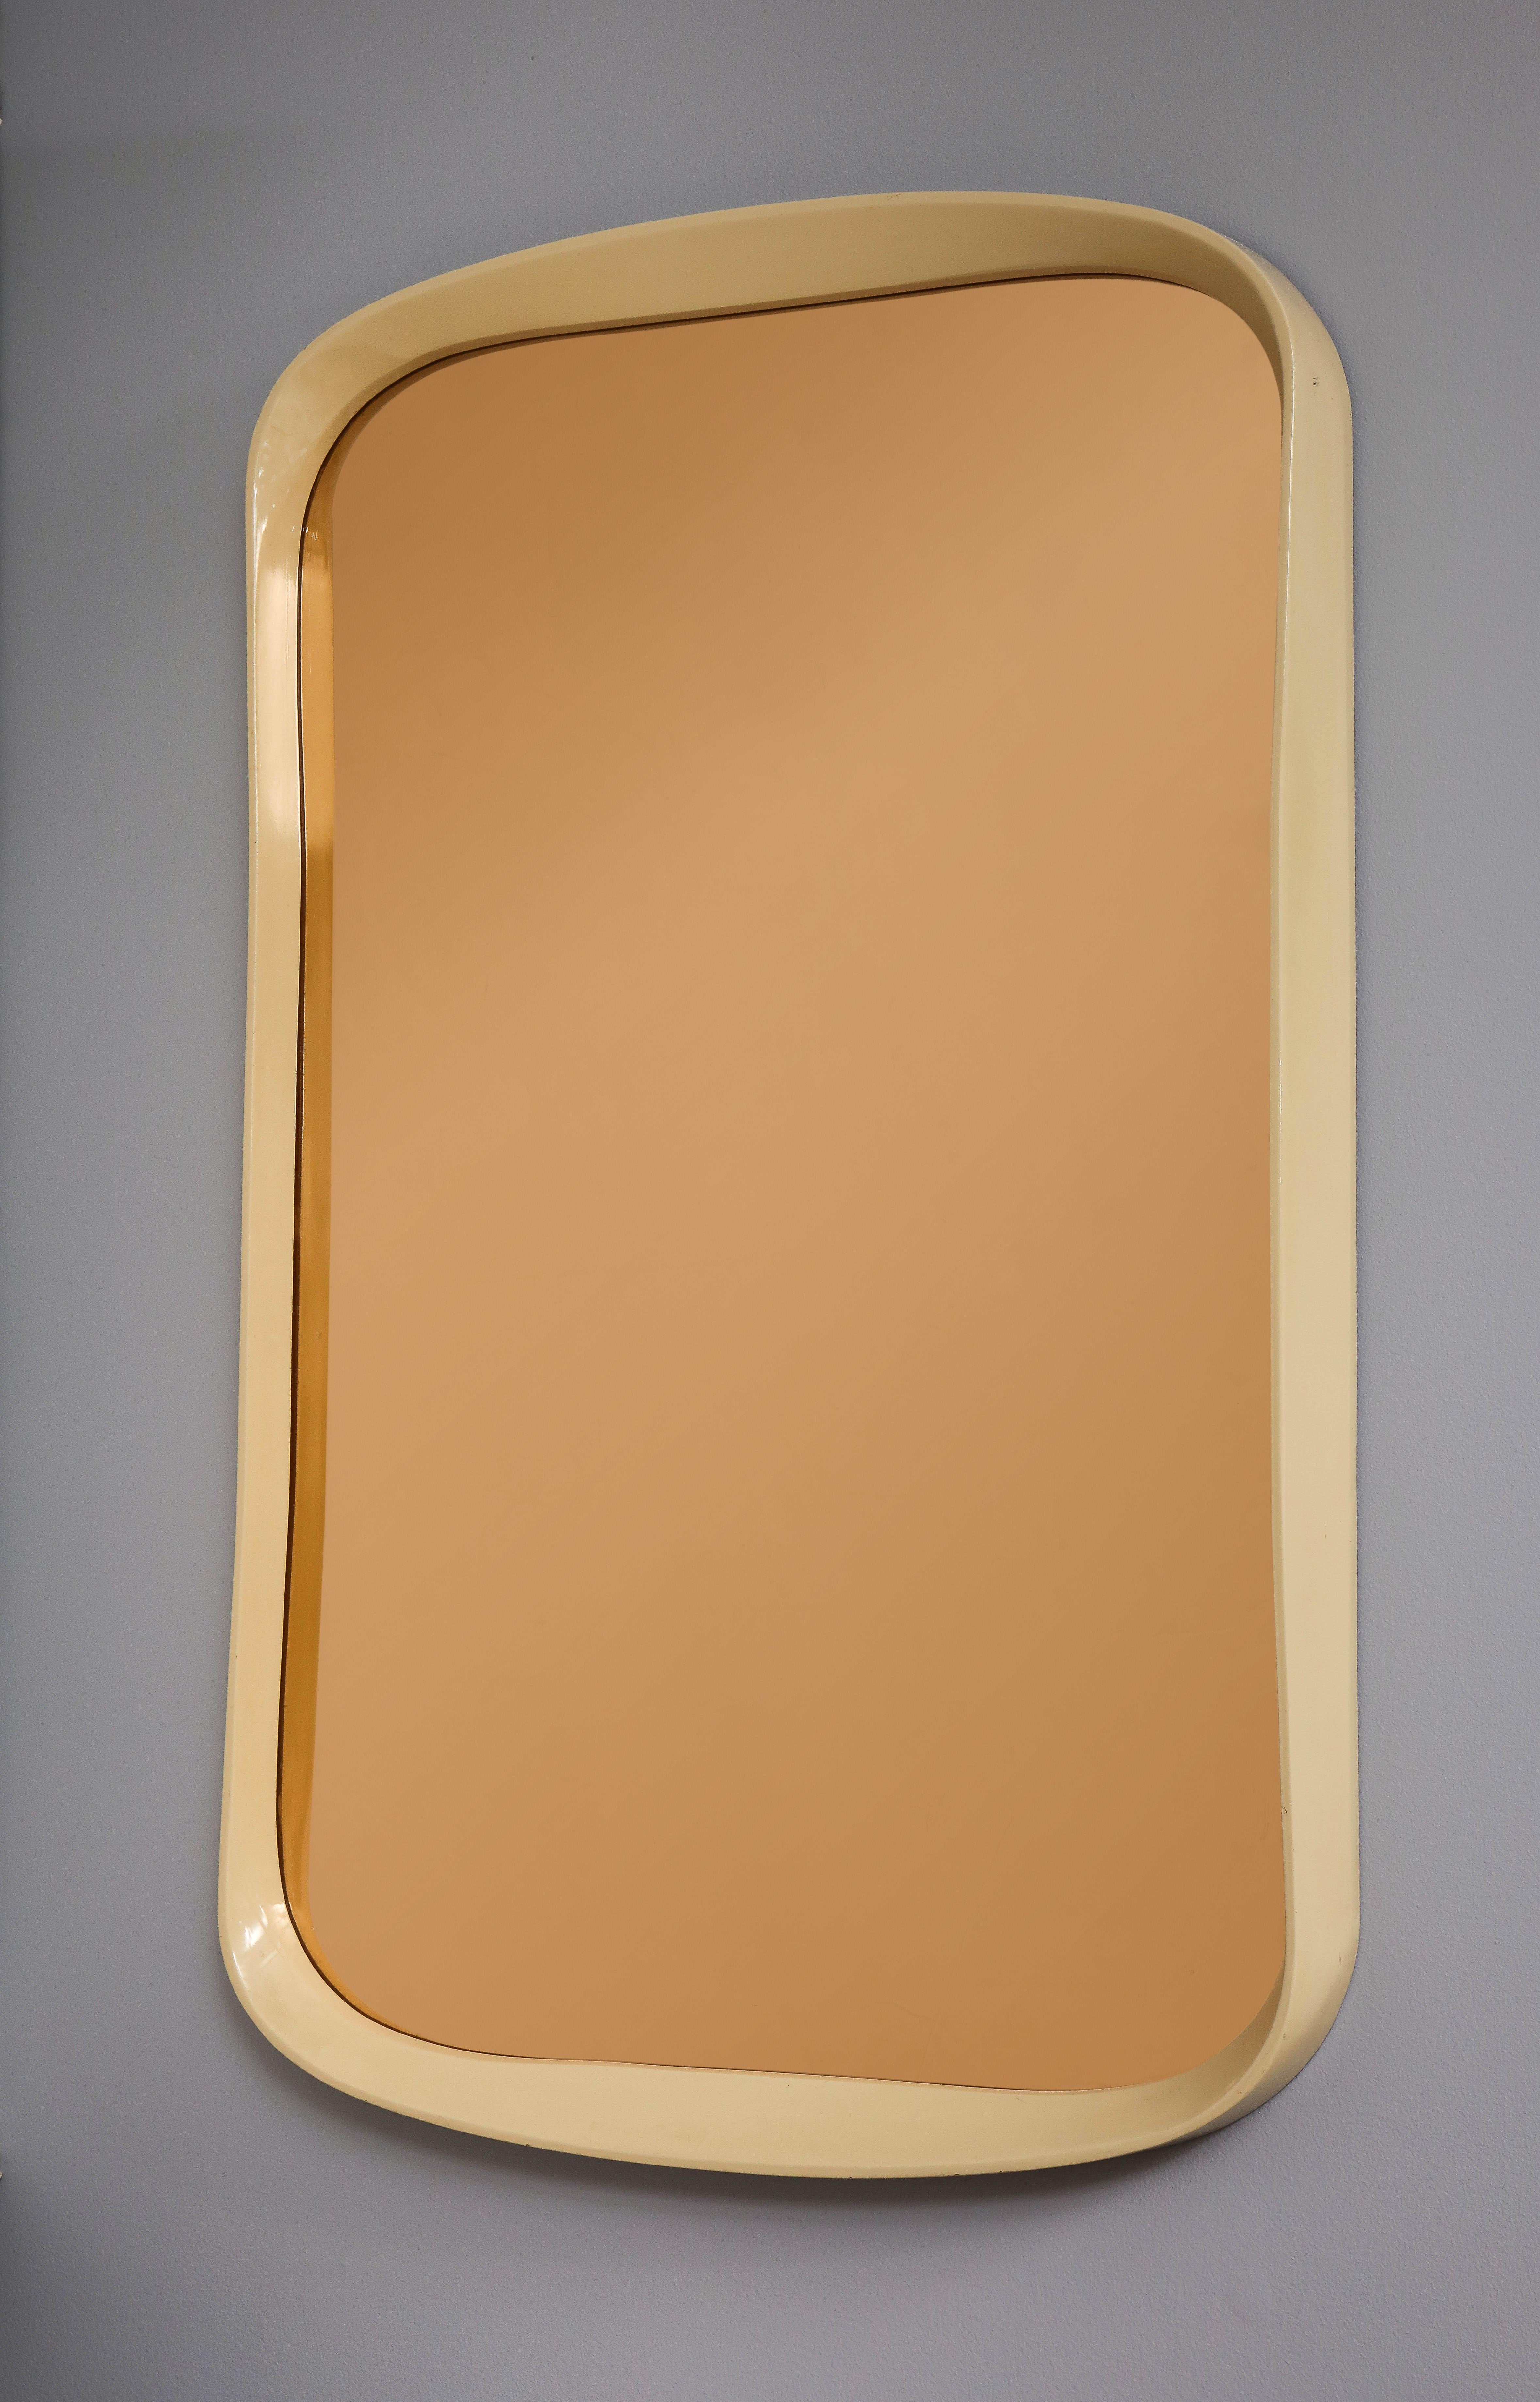 Italian 1970s lacquered and rose gold glass rectangular mirror
Italy, circa 1970 
Size: 41 1/2